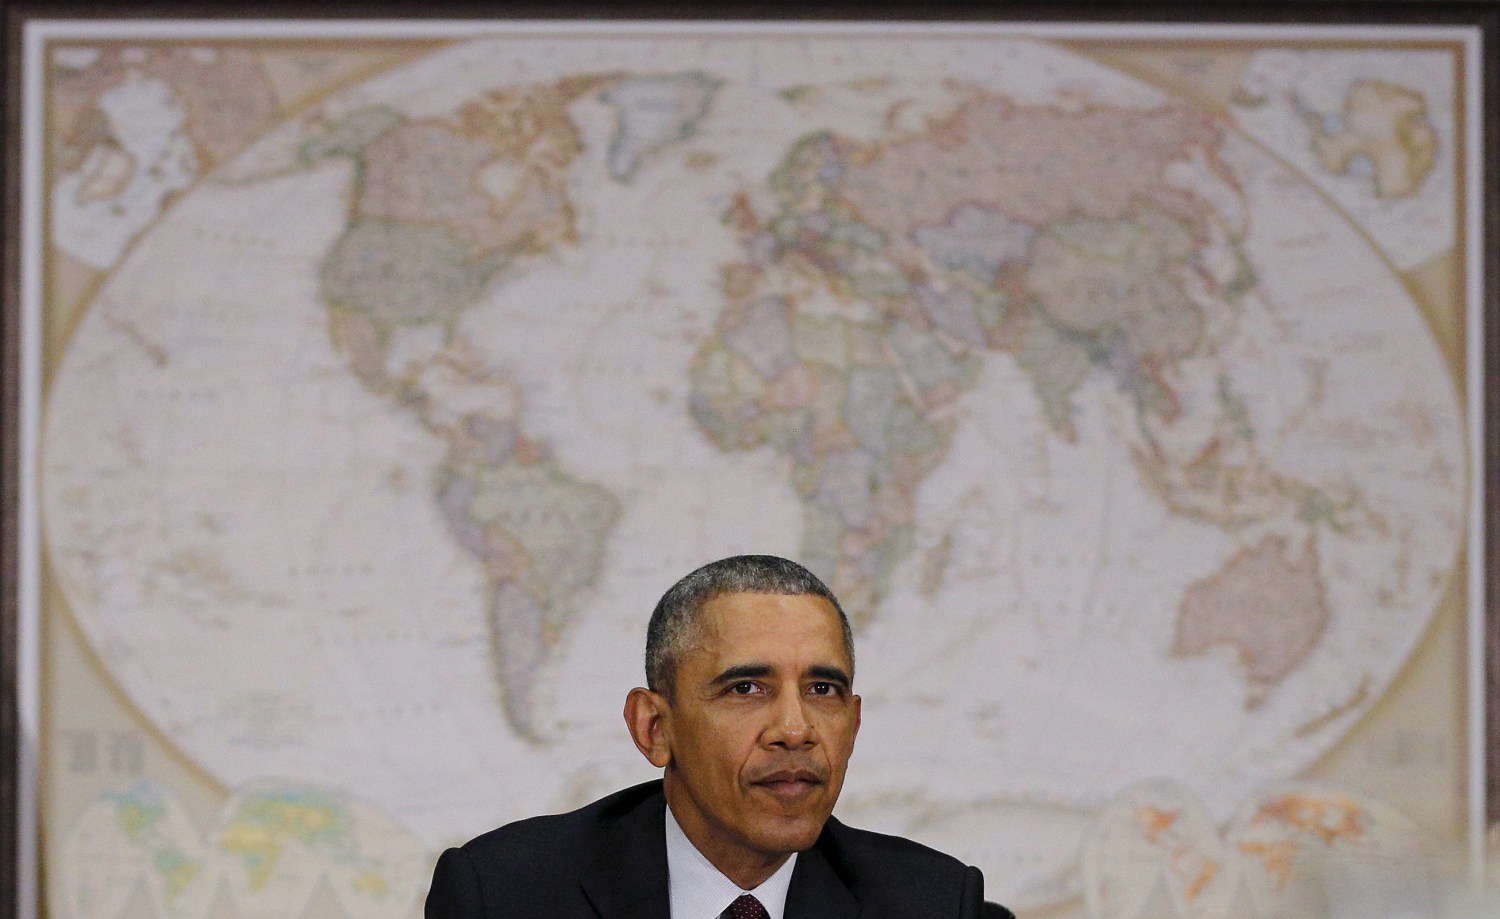 President Barack Obama sitting in front of a map of the world